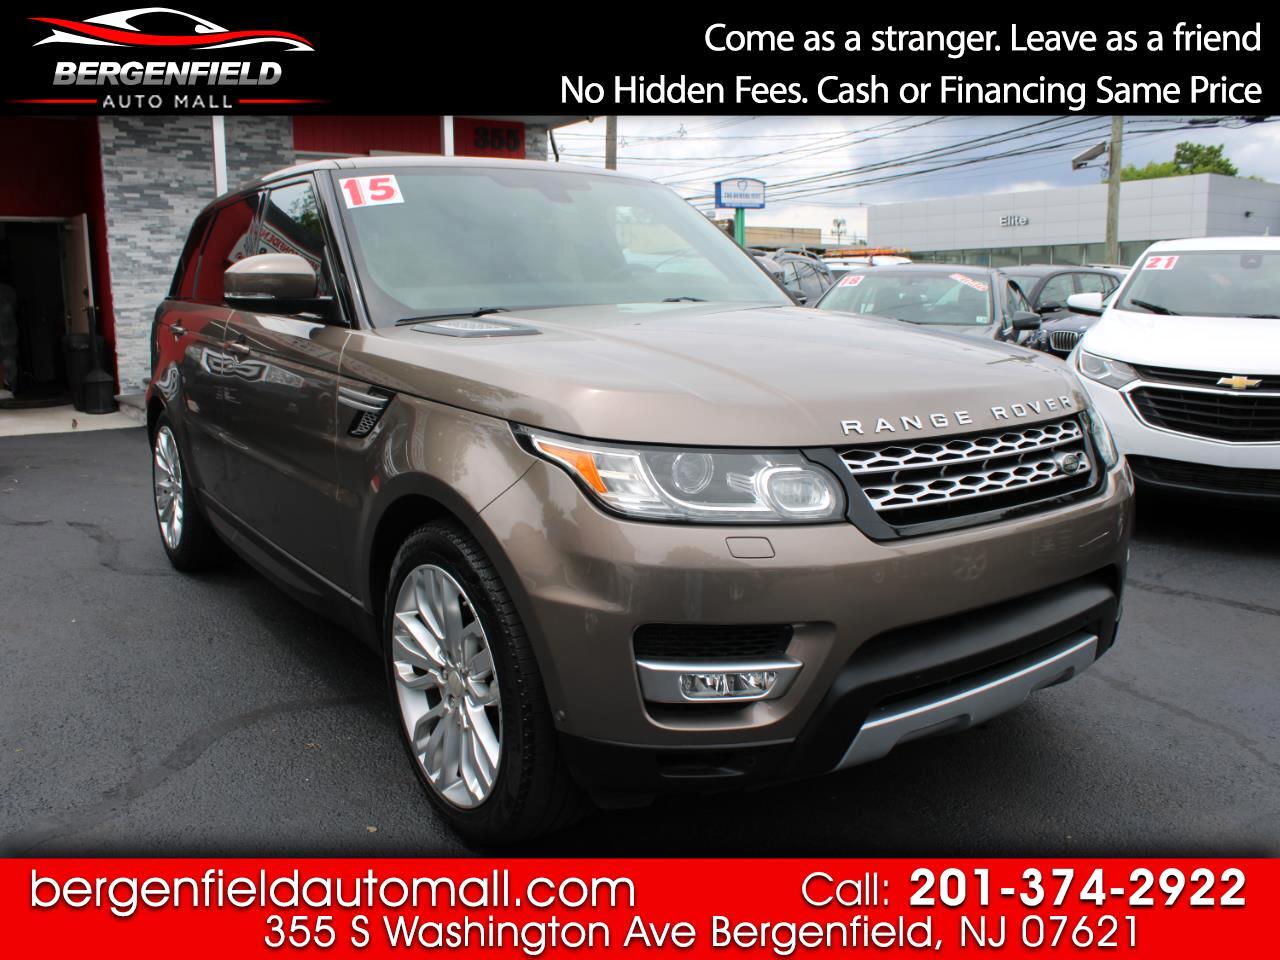 Used Land Rover Range Rover Sport Bergenfield Nj